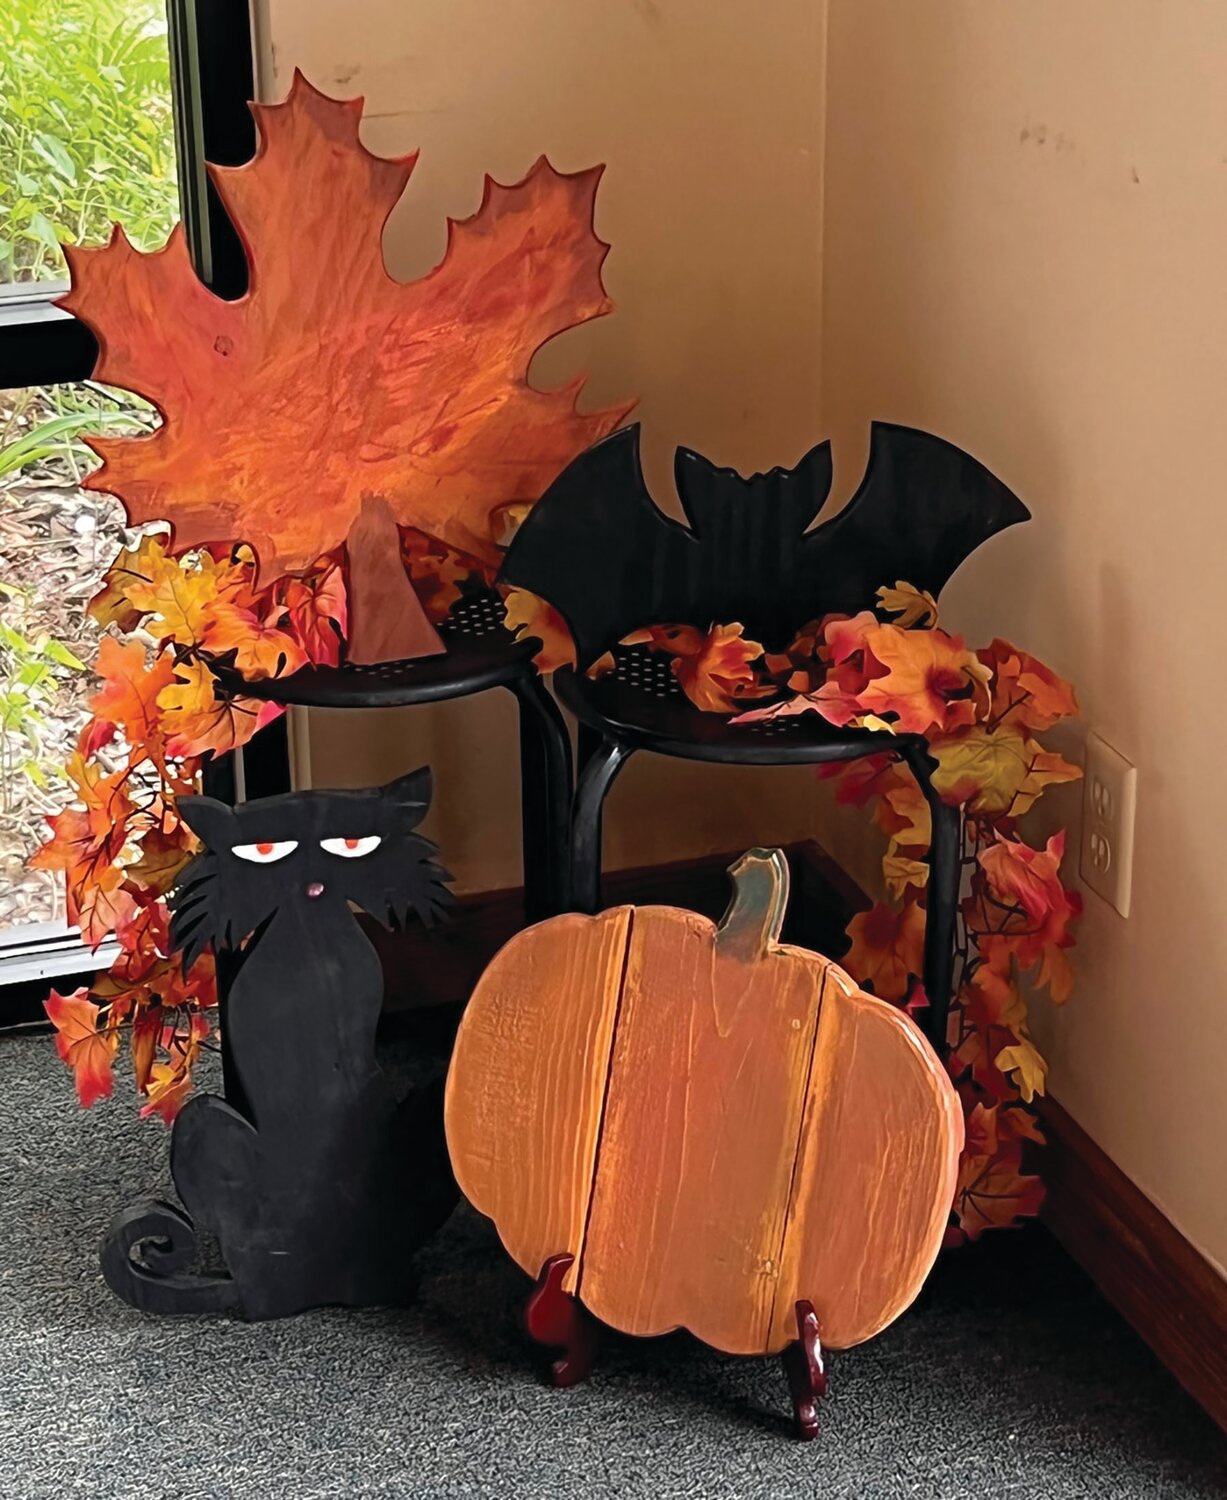 Volunteers created Trunk or Treat decorations for the visitor center at W.P. Franklin South Recreation Area.